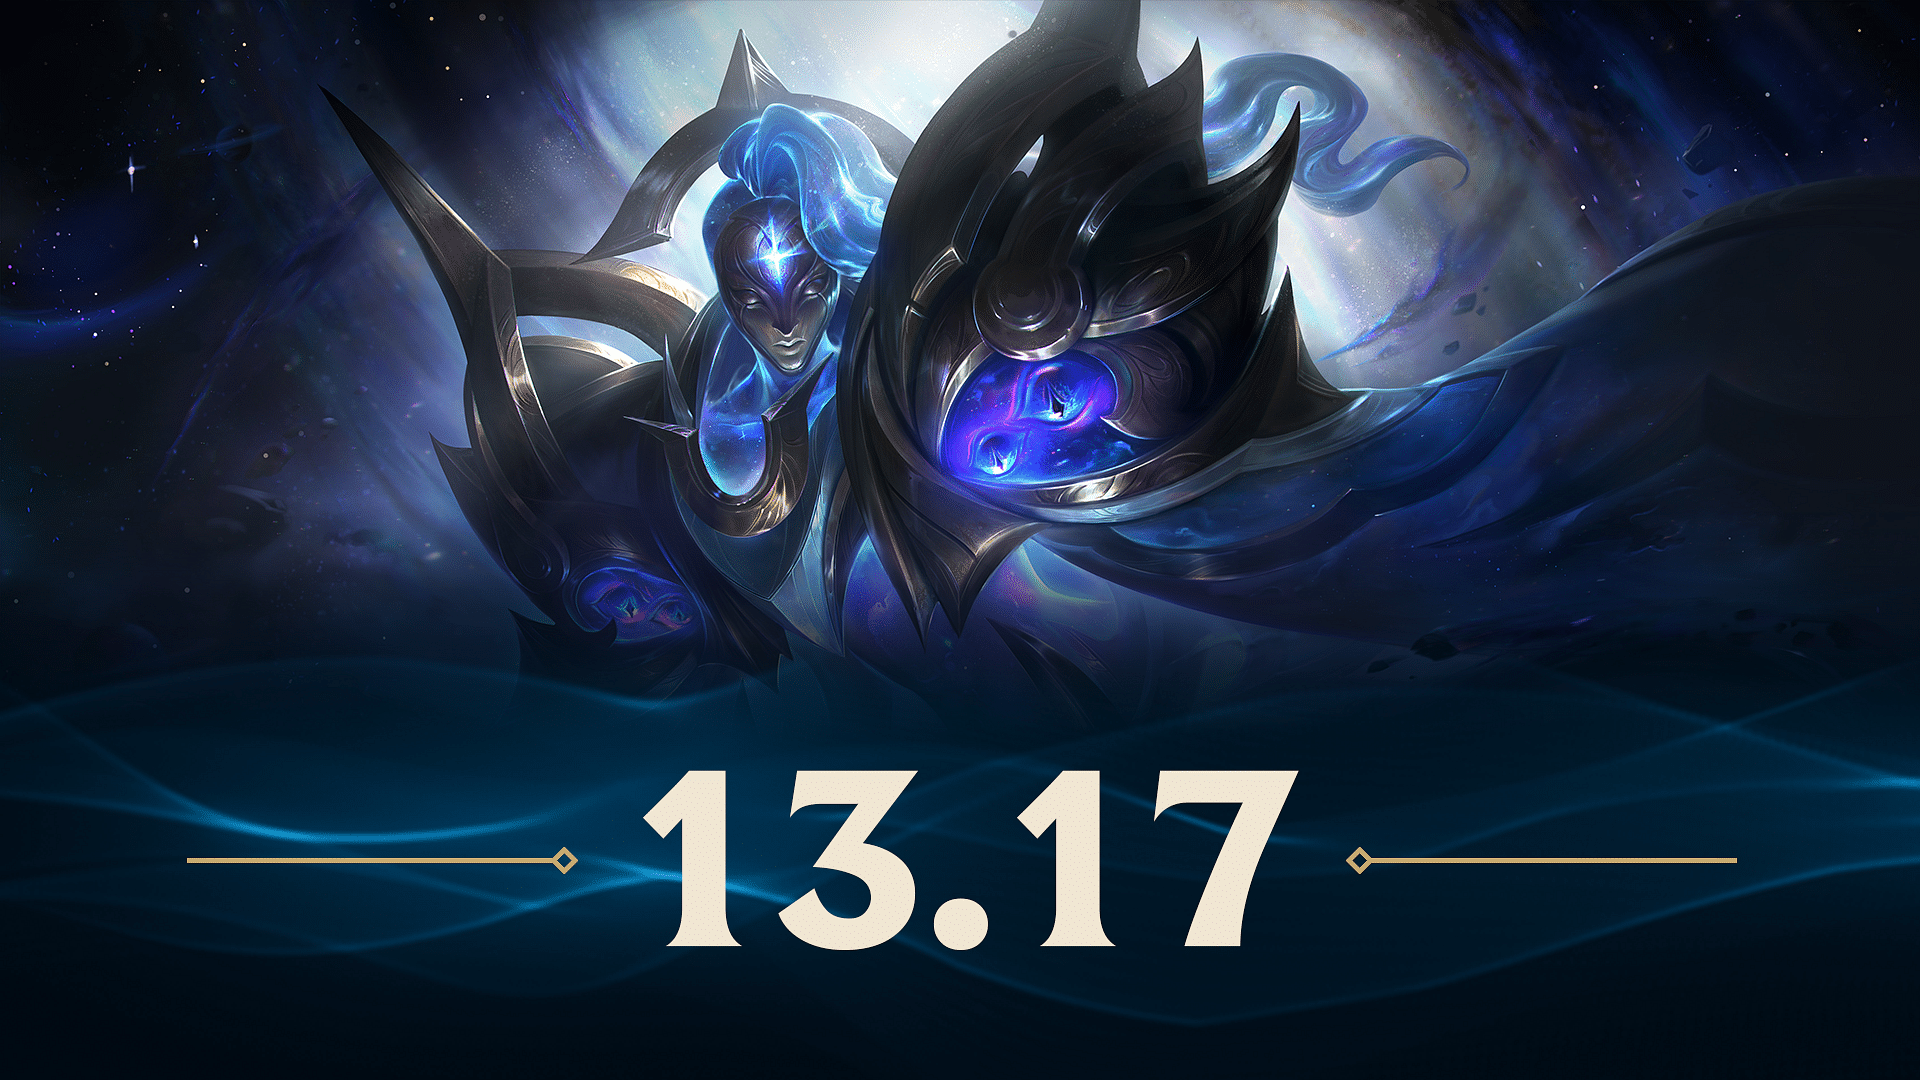 An image showing the main cover for League of Legends 13.17 update